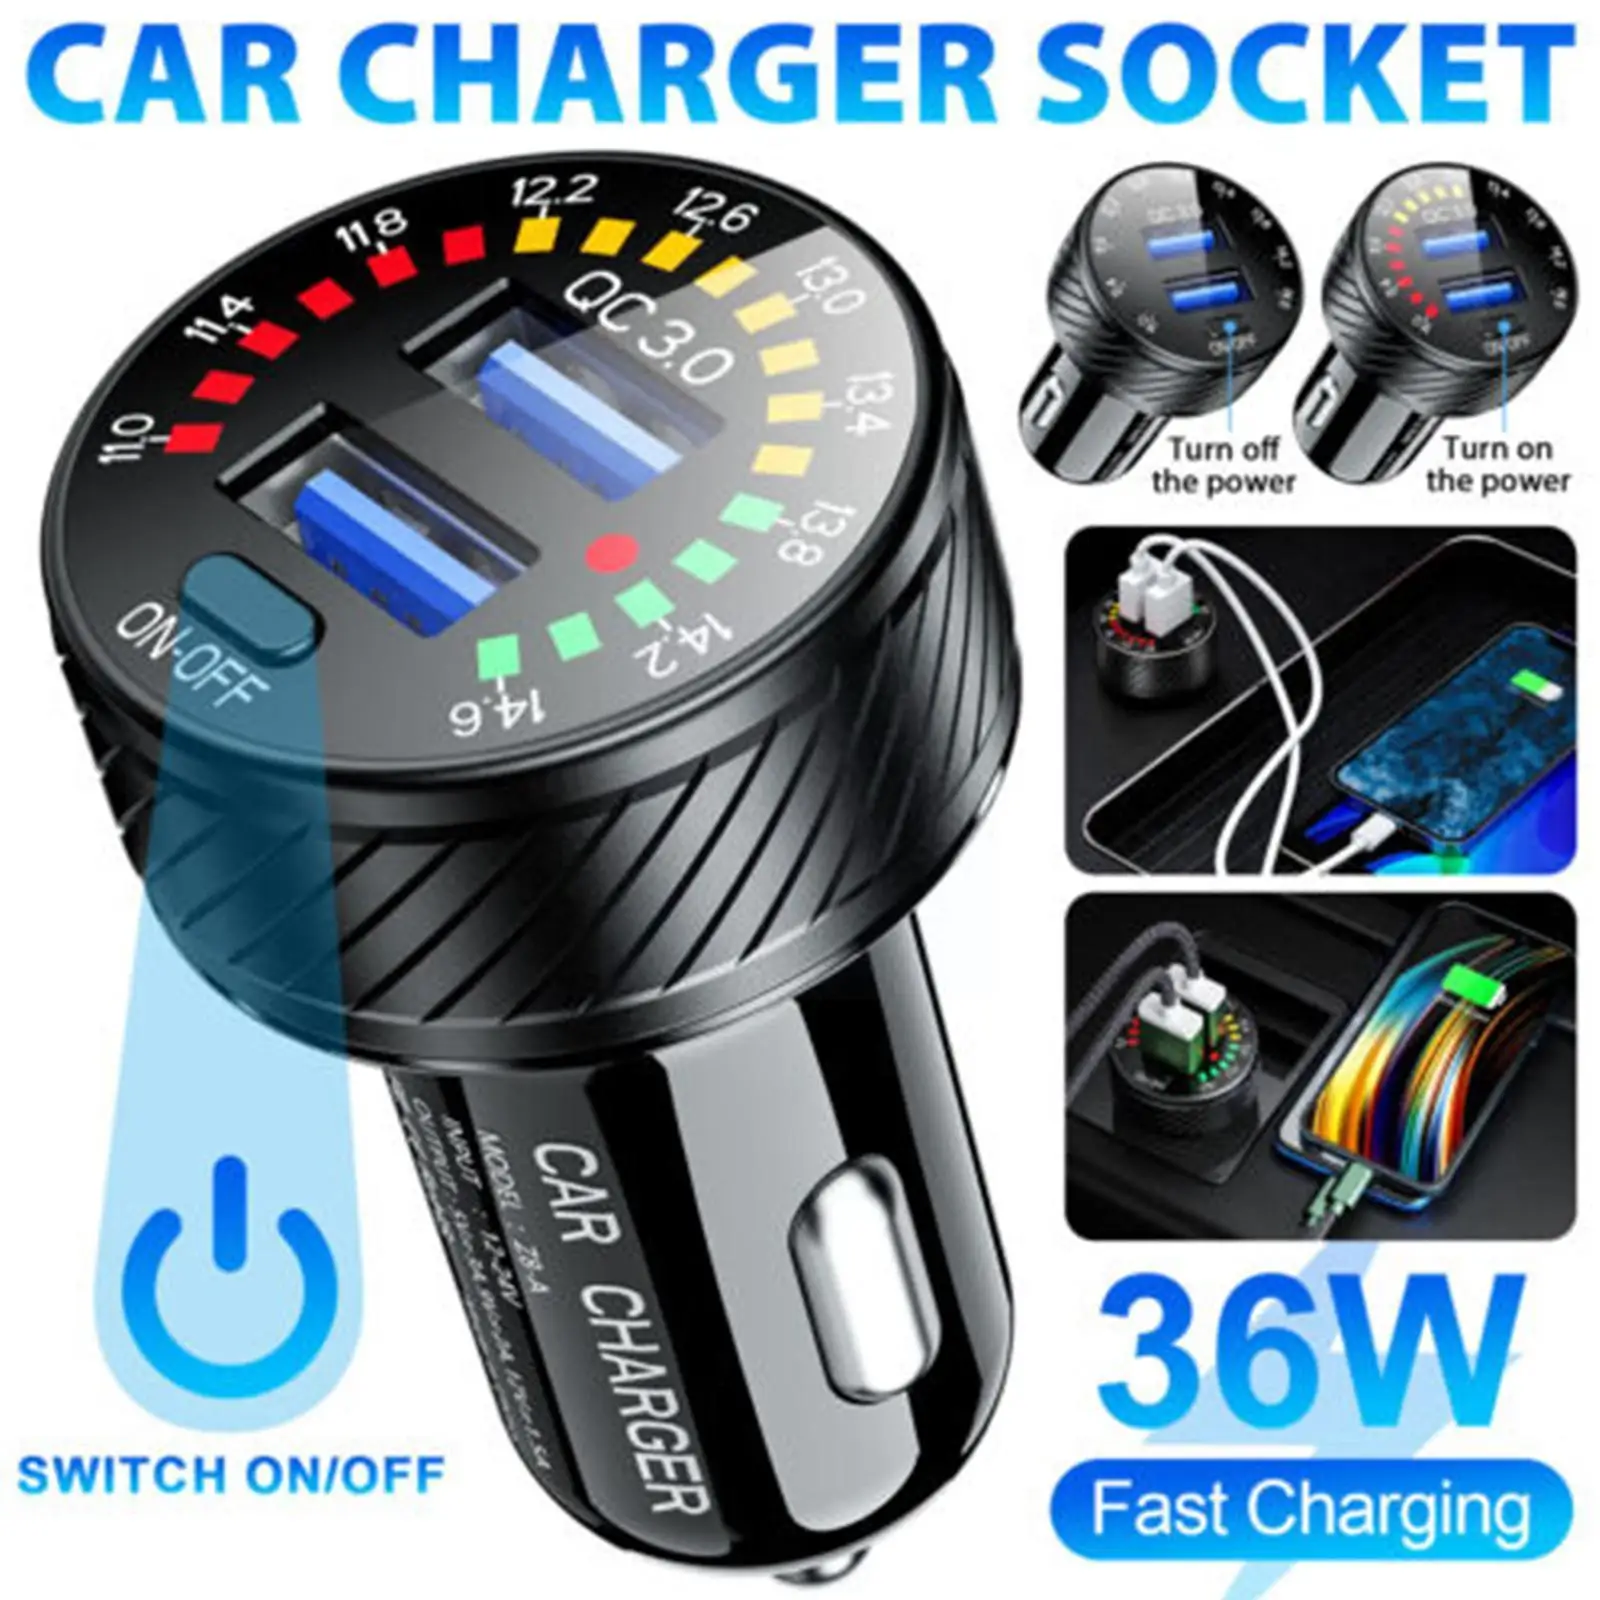 

36W USB Car Charger Dual QC3.0 Quick Charge Cigarette Mobile Lighter with Phone Charge Voltmeter Compatible Fast Adapter Ta D0Y2